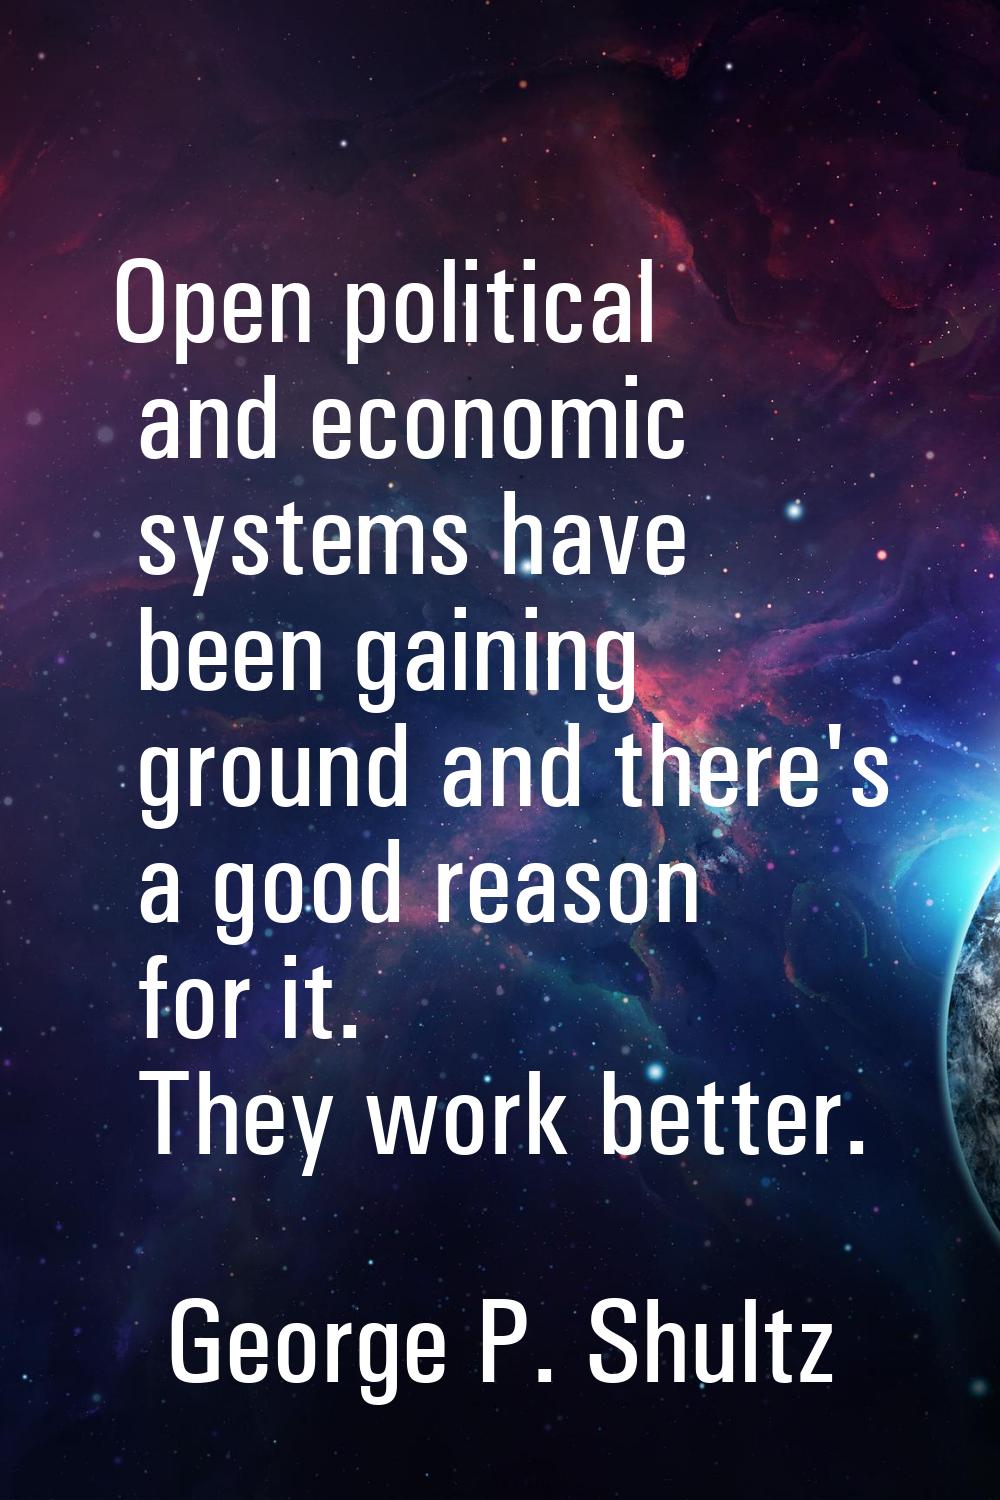 Open political and economic systems have been gaining ground and there's a good reason for it. They